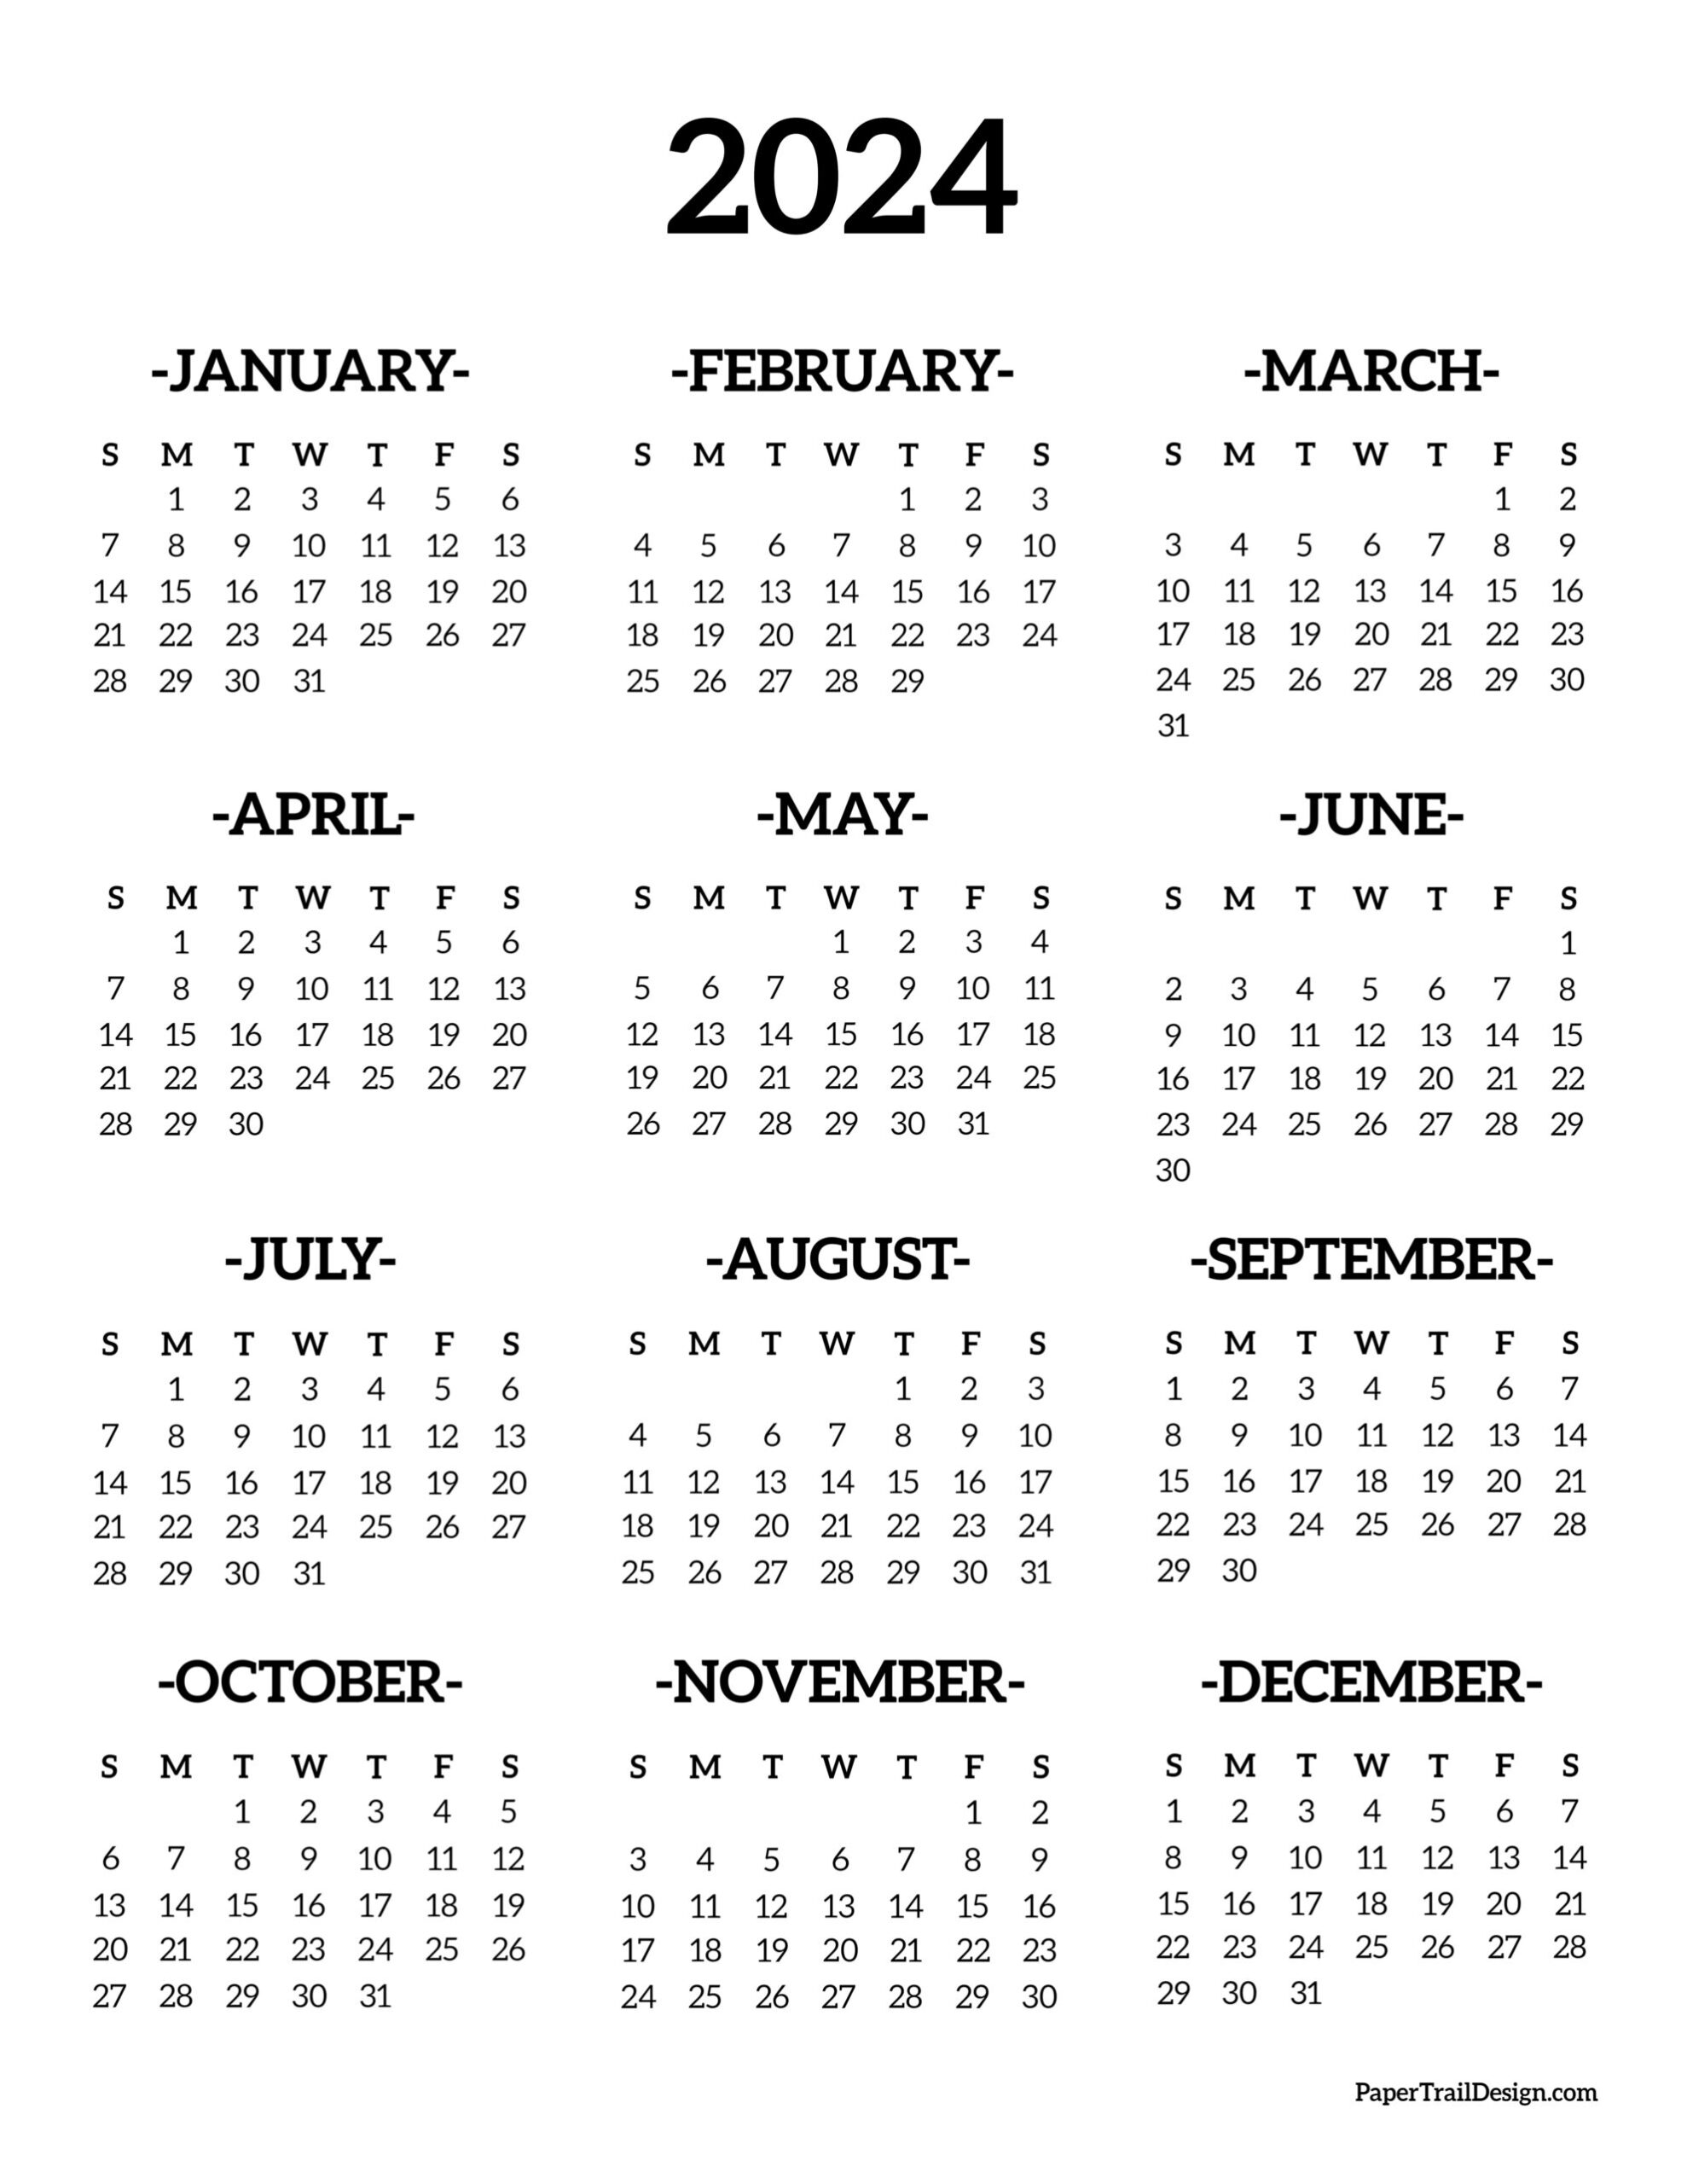 Calendar 2024 Printable One Page - Paper Trail Design for Full Year Printable Calendar 2024